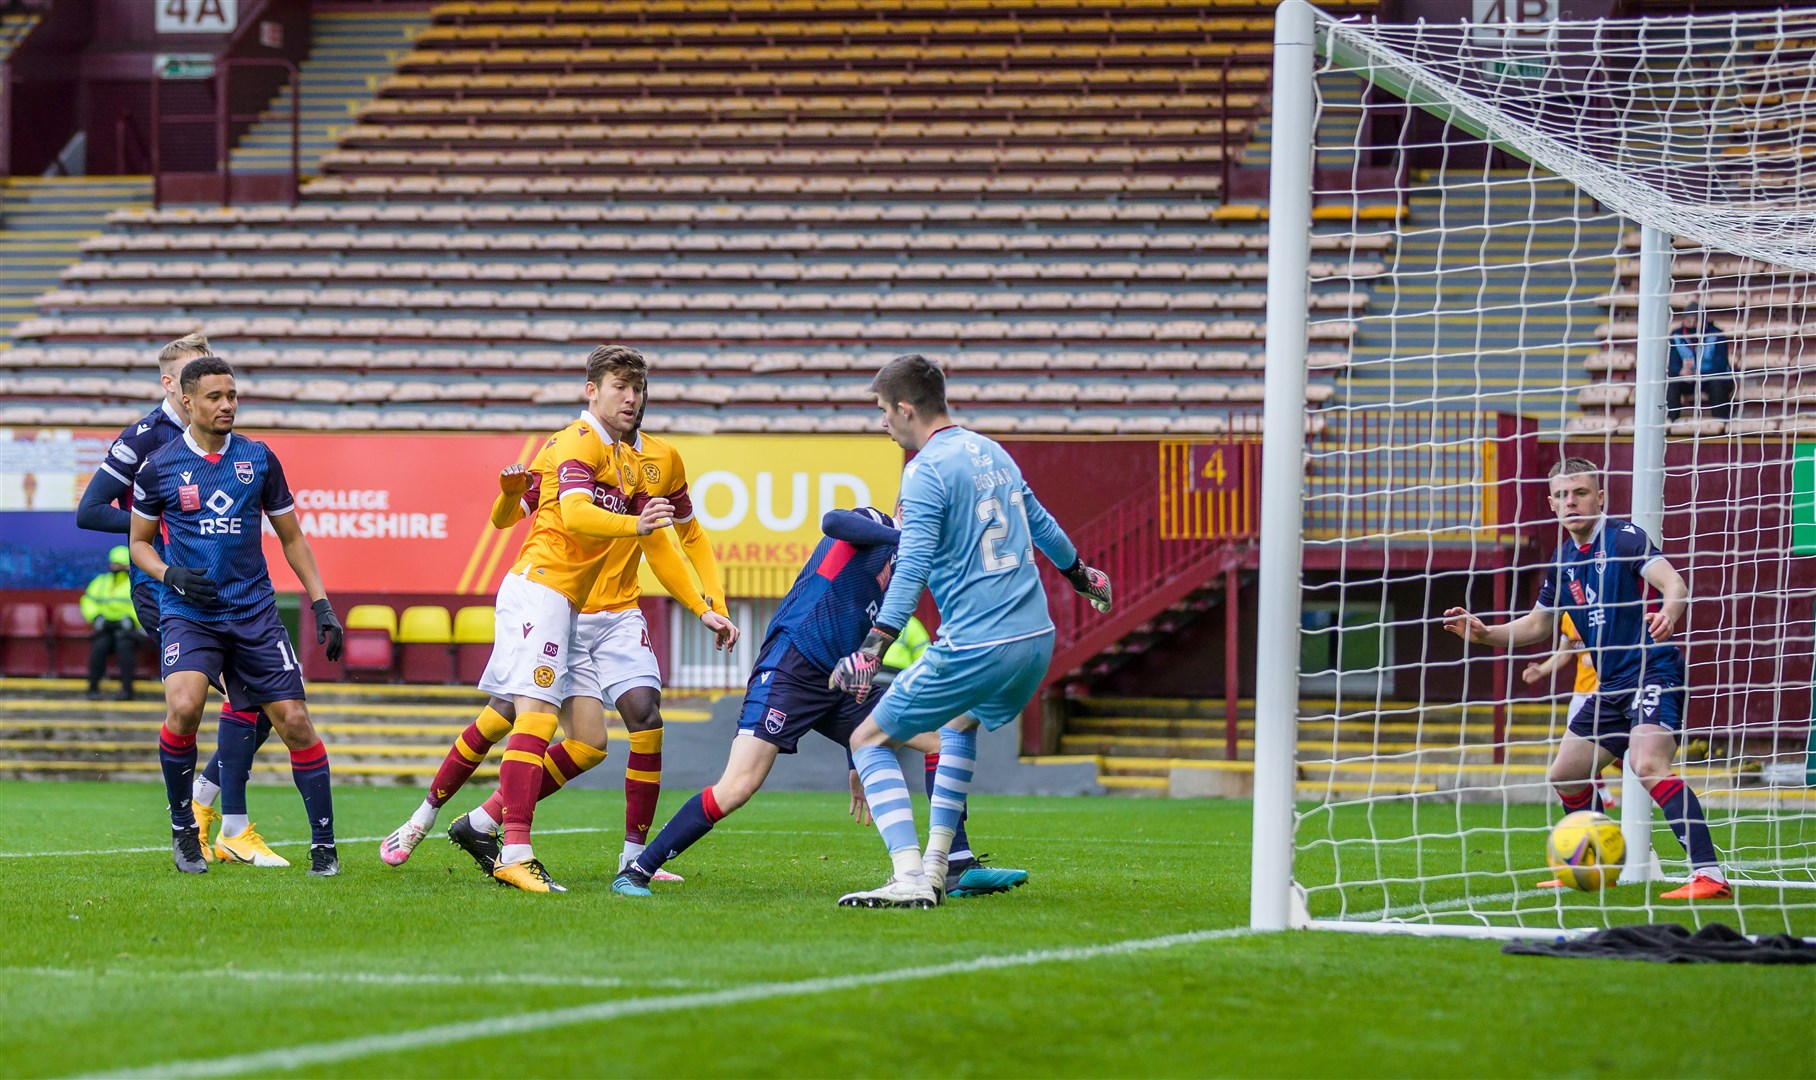 Picture - Ken Macpherson, Inverness. Motherwell(4) v Ross County(0). 24.10.19. This goal from Motherwell's Callum Lang makes it 3-0.